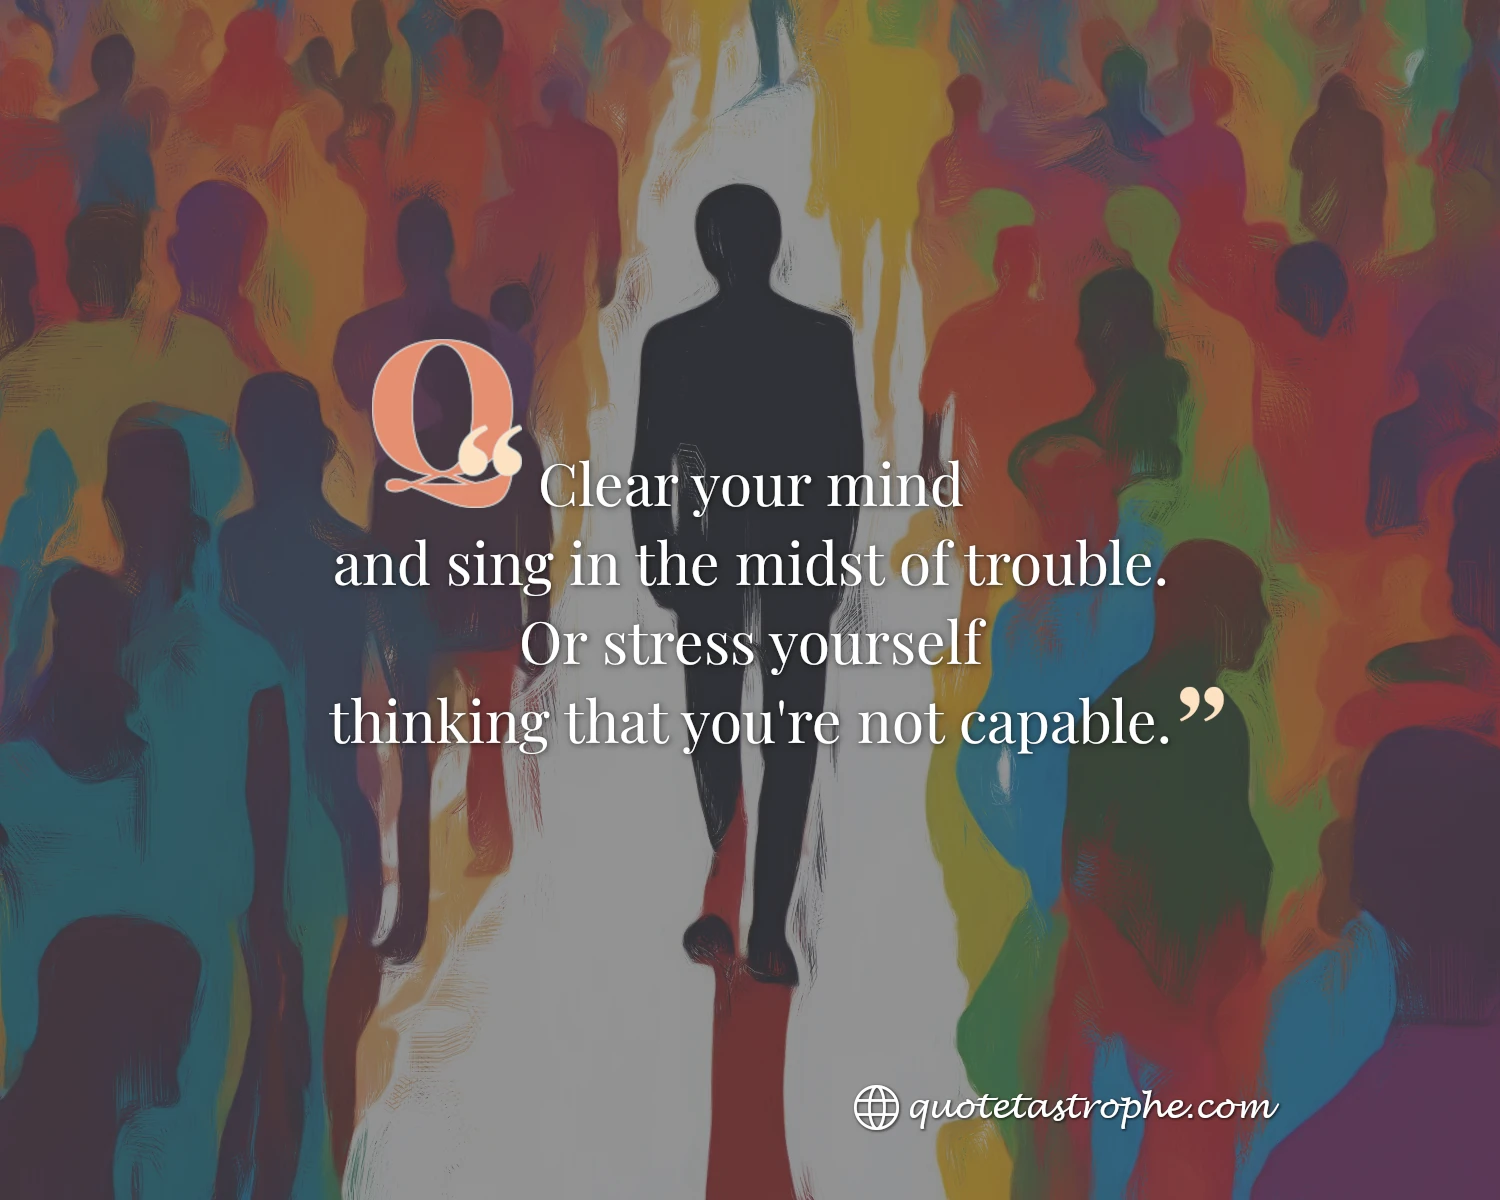 A Clear Mind Sings in the Midst of Trouble